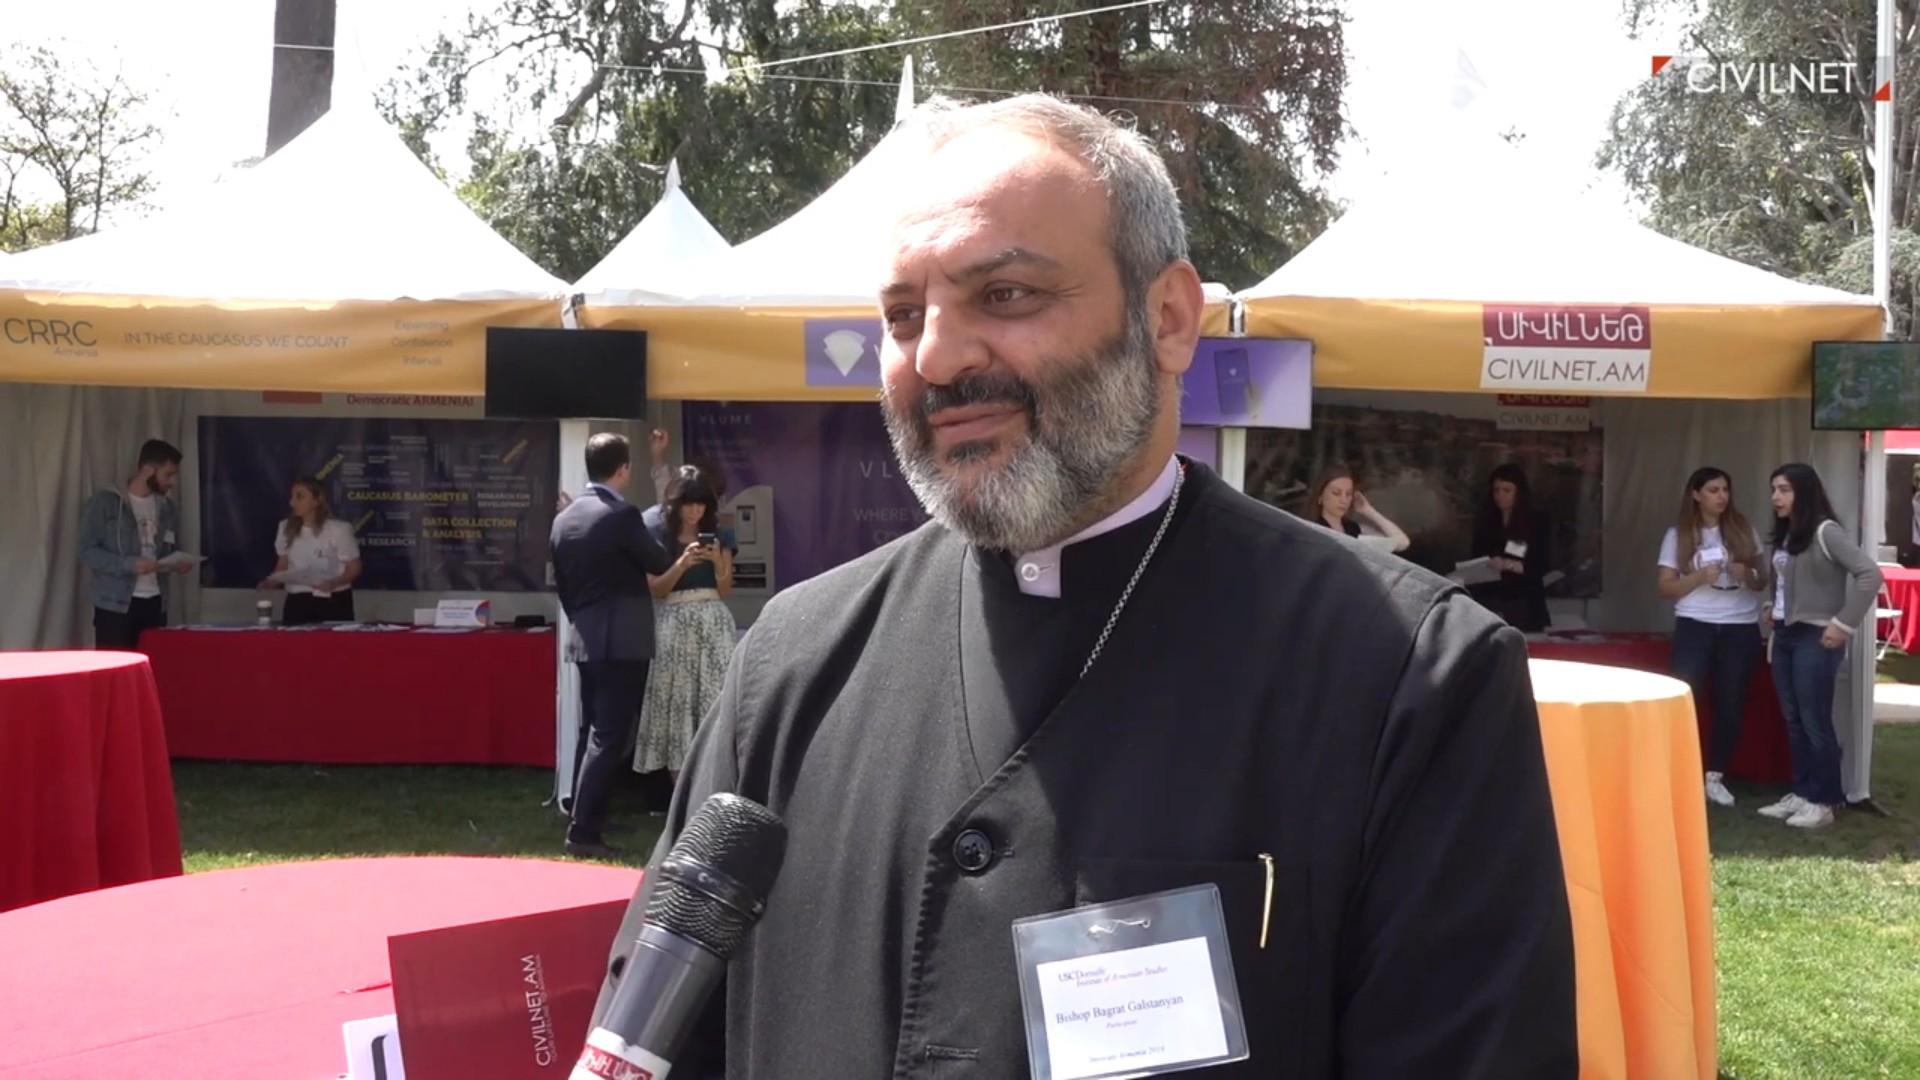 Bishop Bagrat Galstanyan: “Without Understanding Armenia, We Cannot Do Anything”